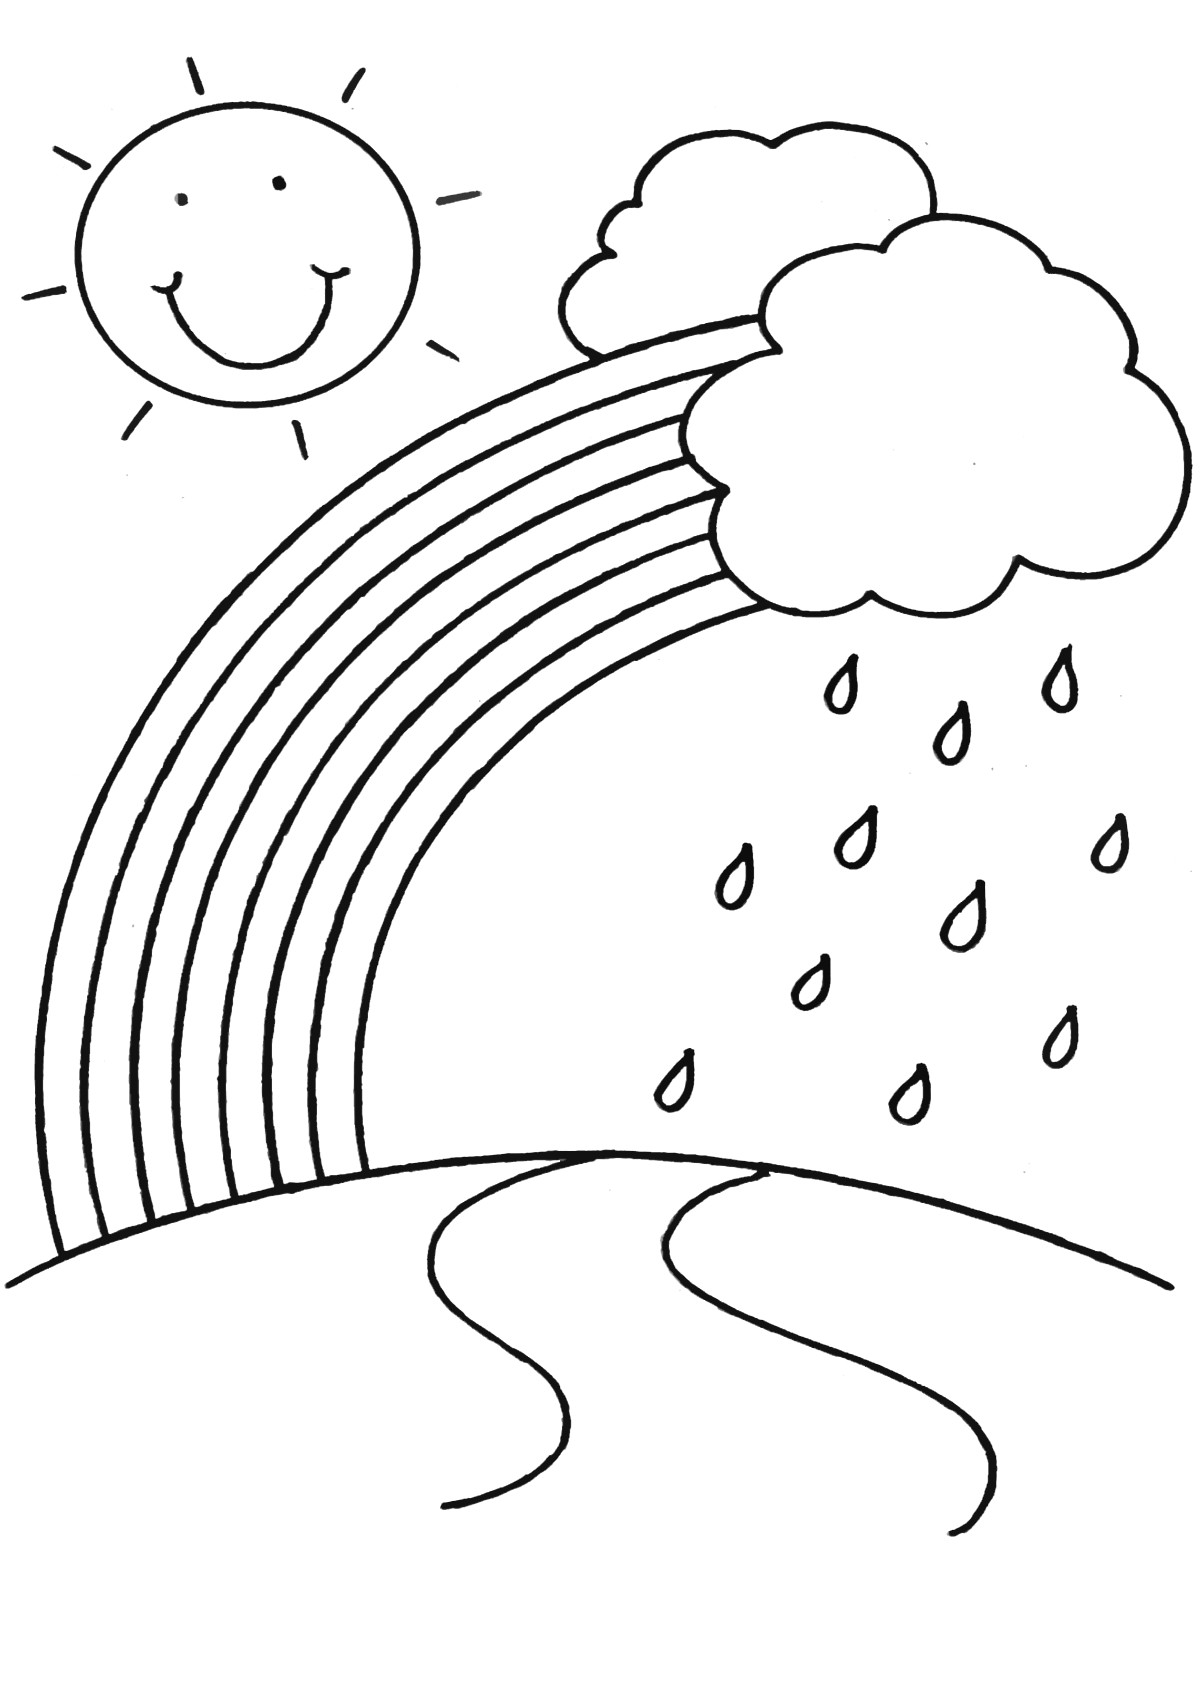 Printable Rainbow Coloring Pages
 Rainbow Coloring Pages for childrens printable for free